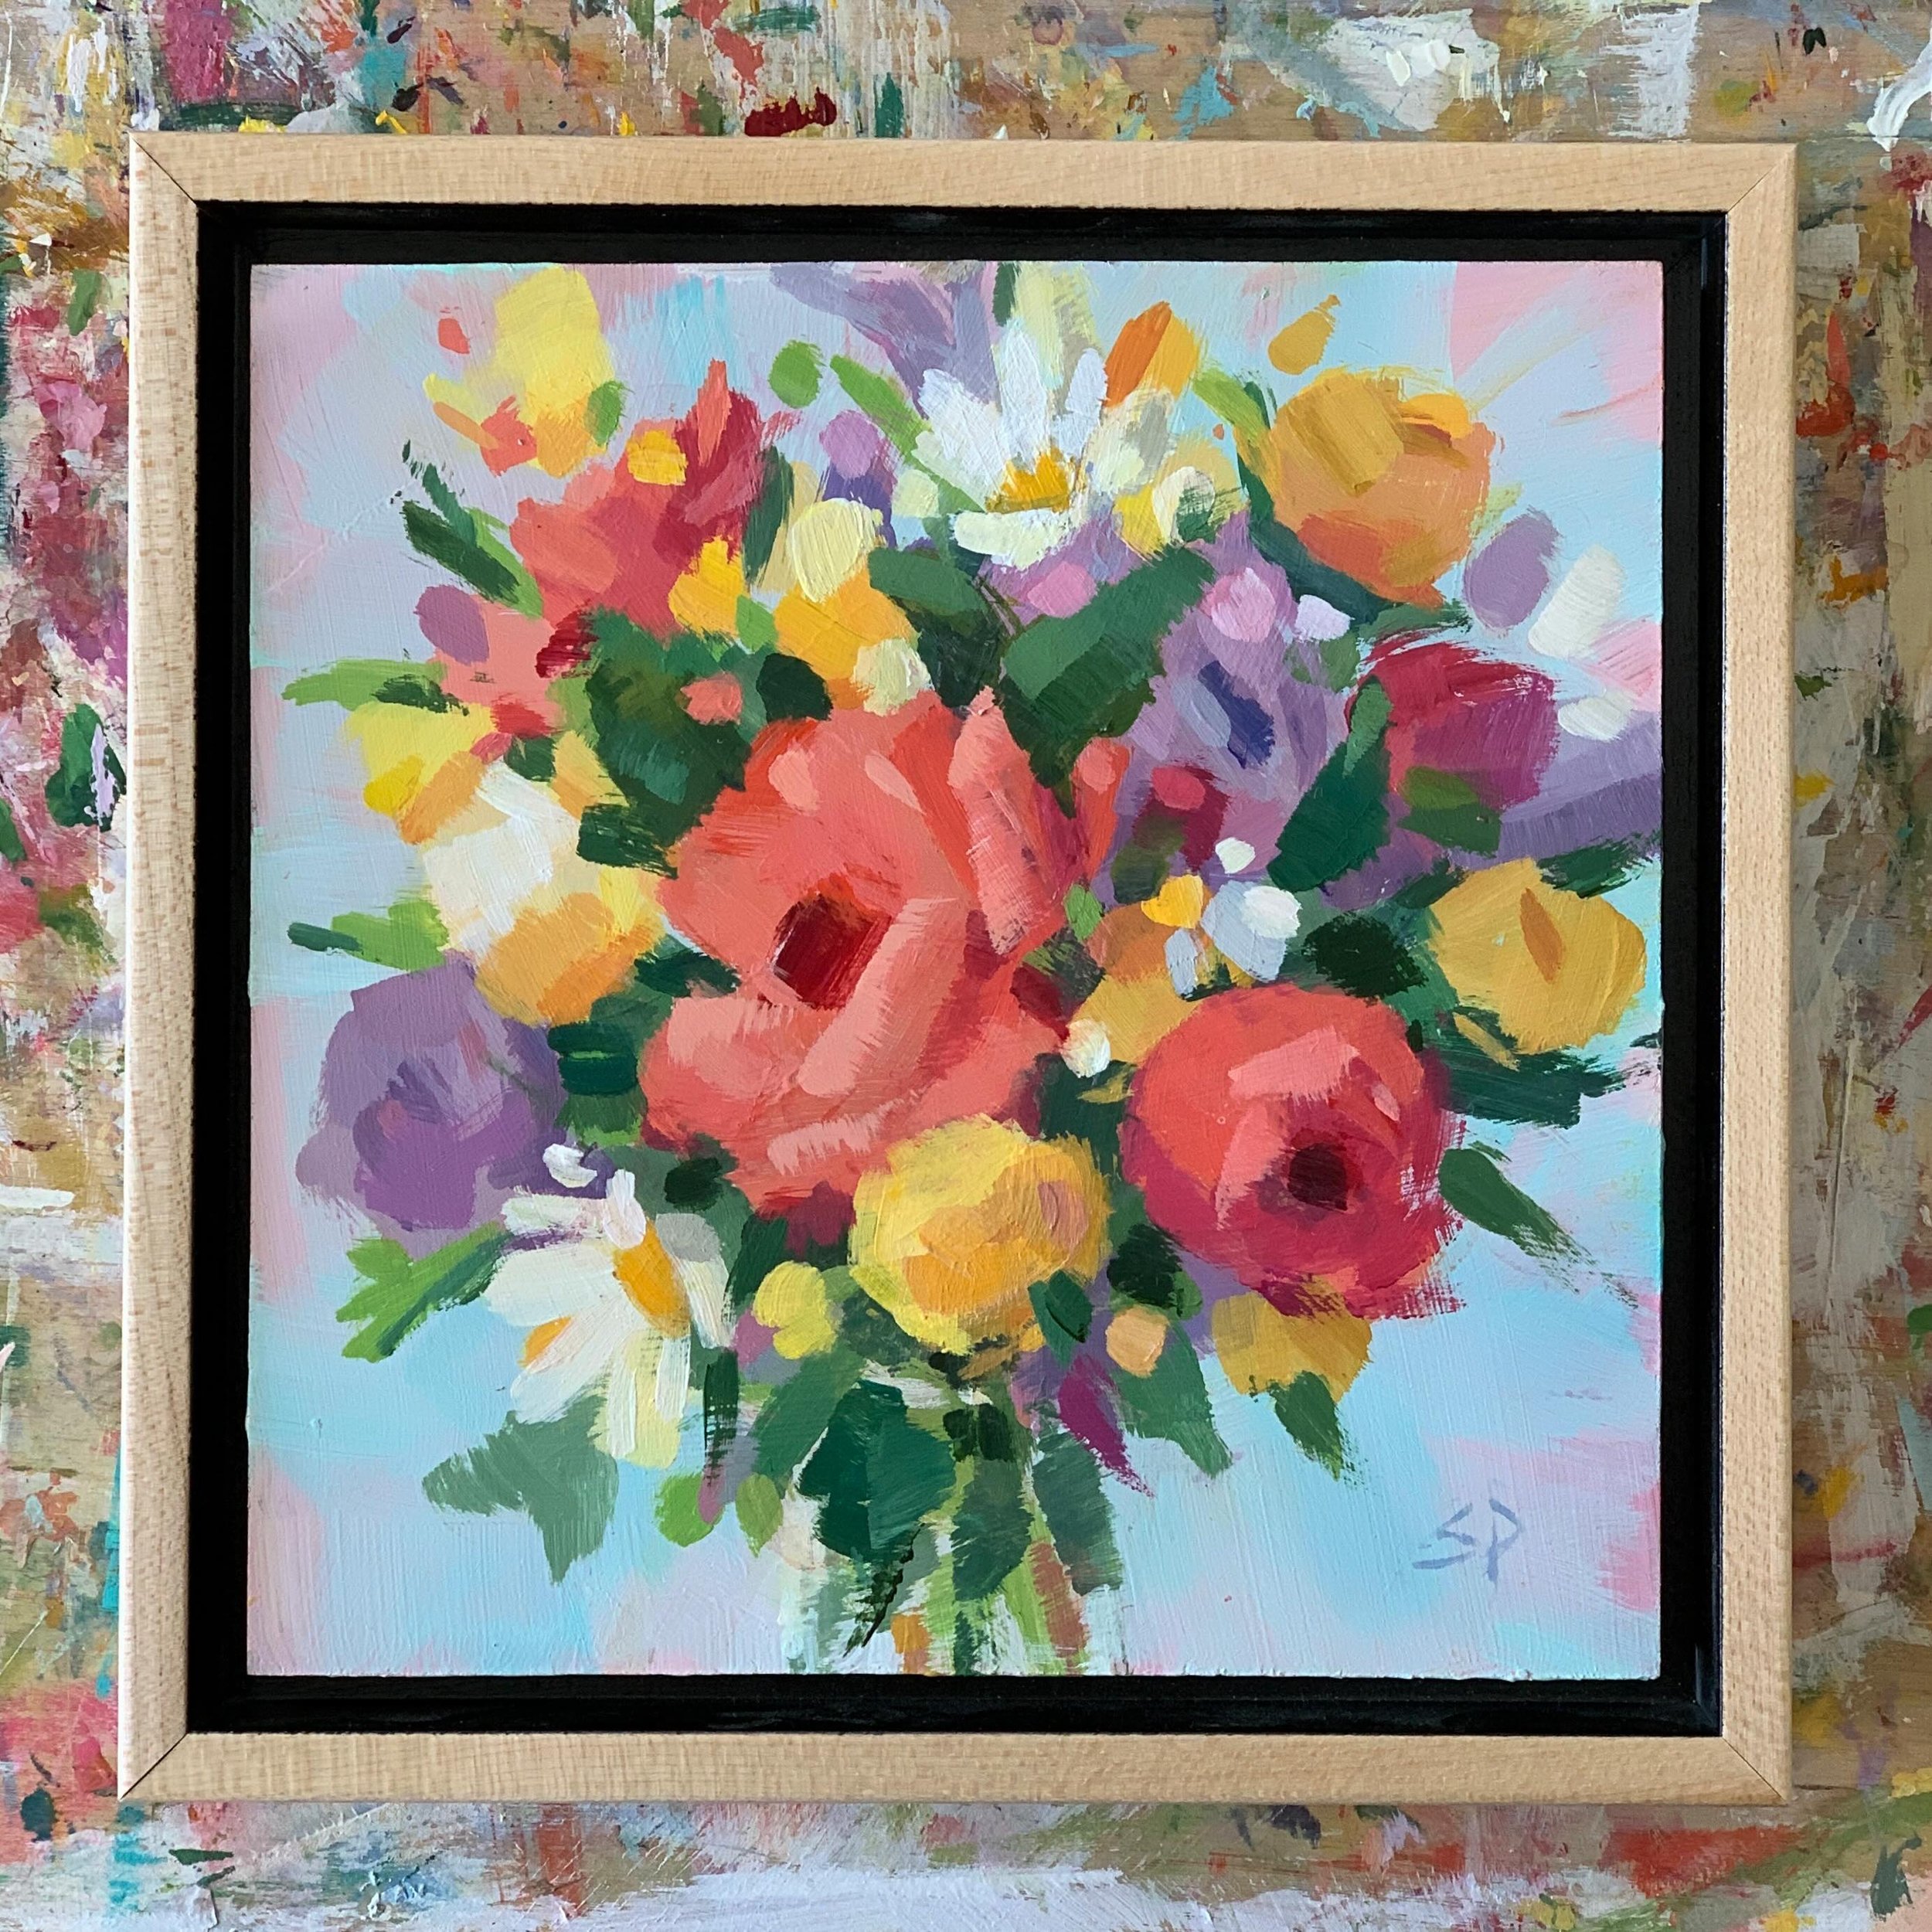 Bouquets All Day, a collection of nine new paintings, comin your way: tomorrow for newsletter subscribers, 4/17 for everyone else 🌼🌸🌷